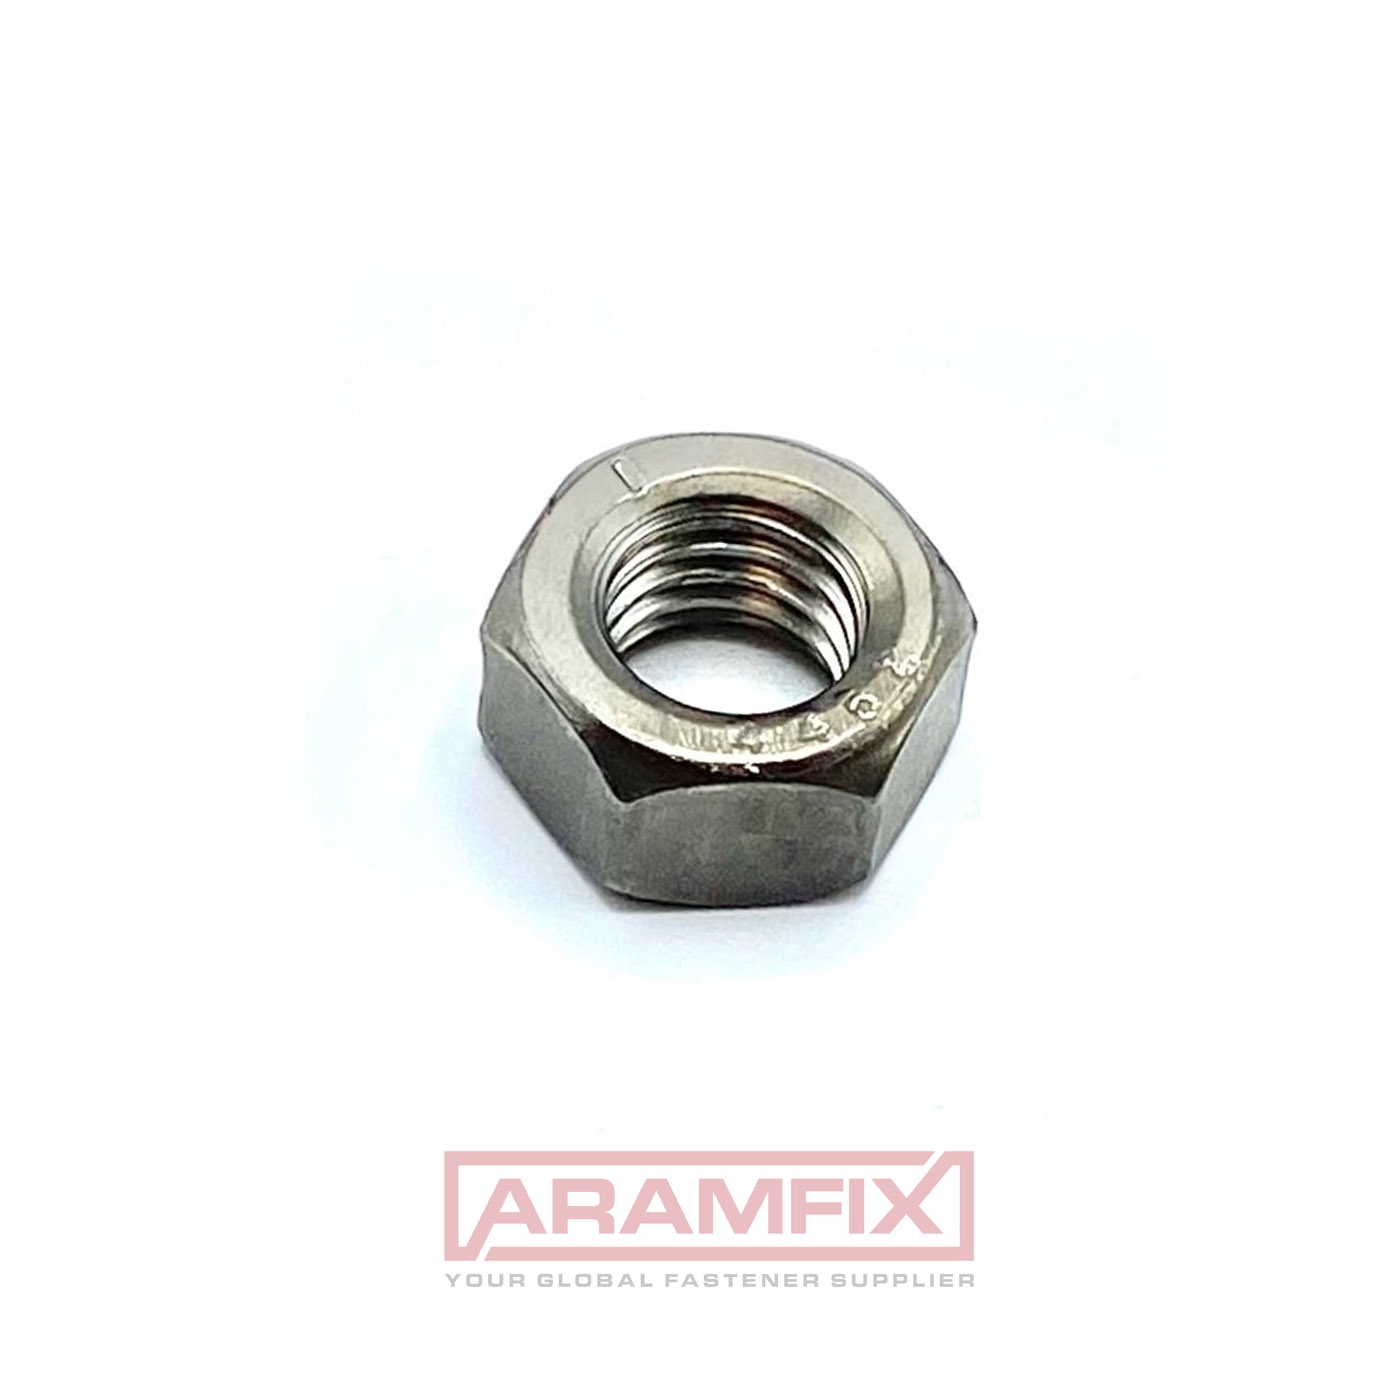 M6 Hex Nuts (ISO 4032) - 18-8 / 304 Stainless Steel: Accu.co.uk: Nuts